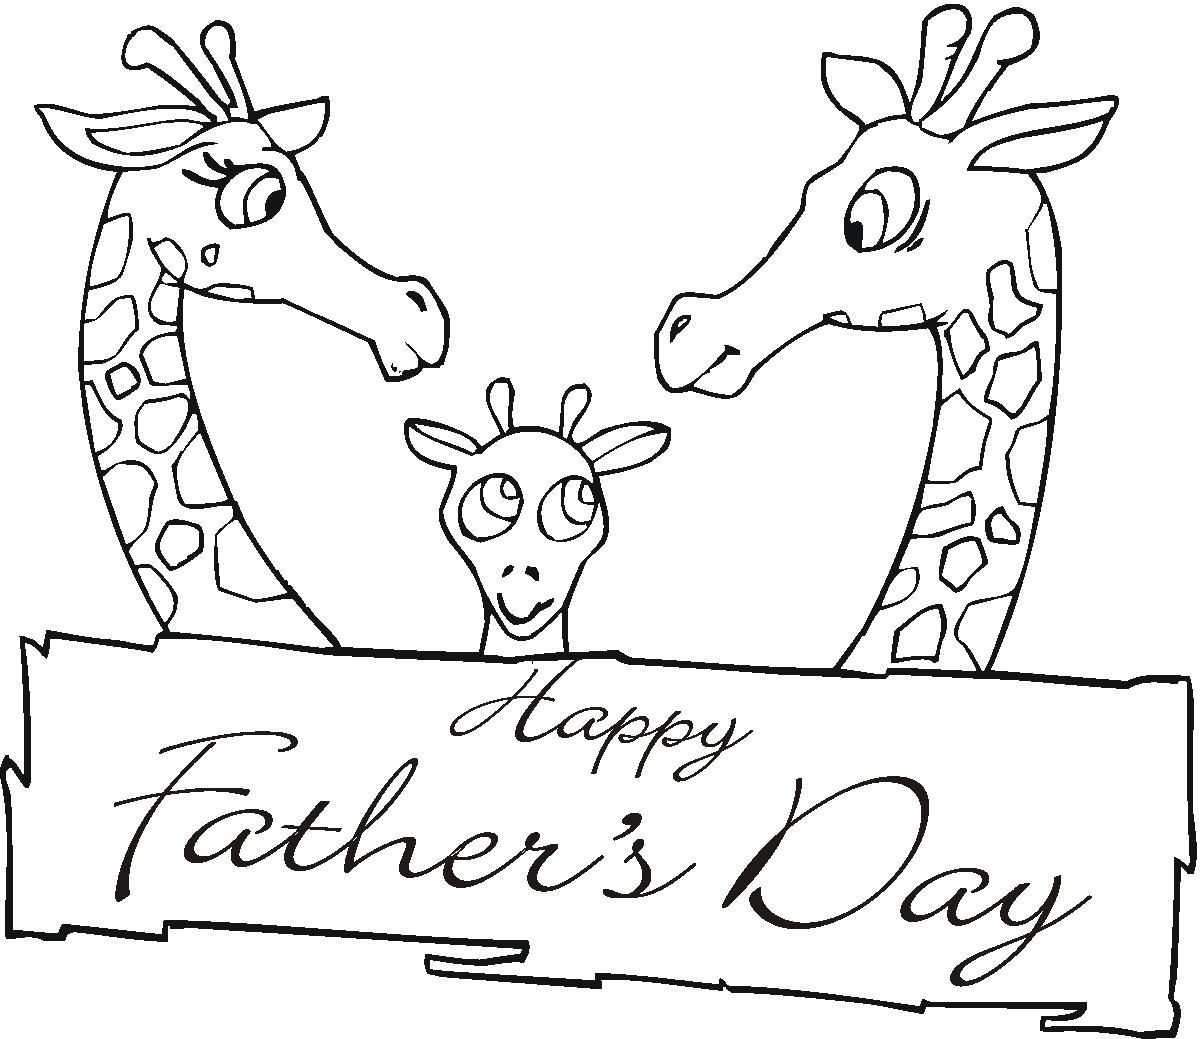 https://www.bestcoloringpagesforkids.com/wp-content/uploads/2018/04/Print-Free-Fathers-Day-Coloring-Pages.jpg